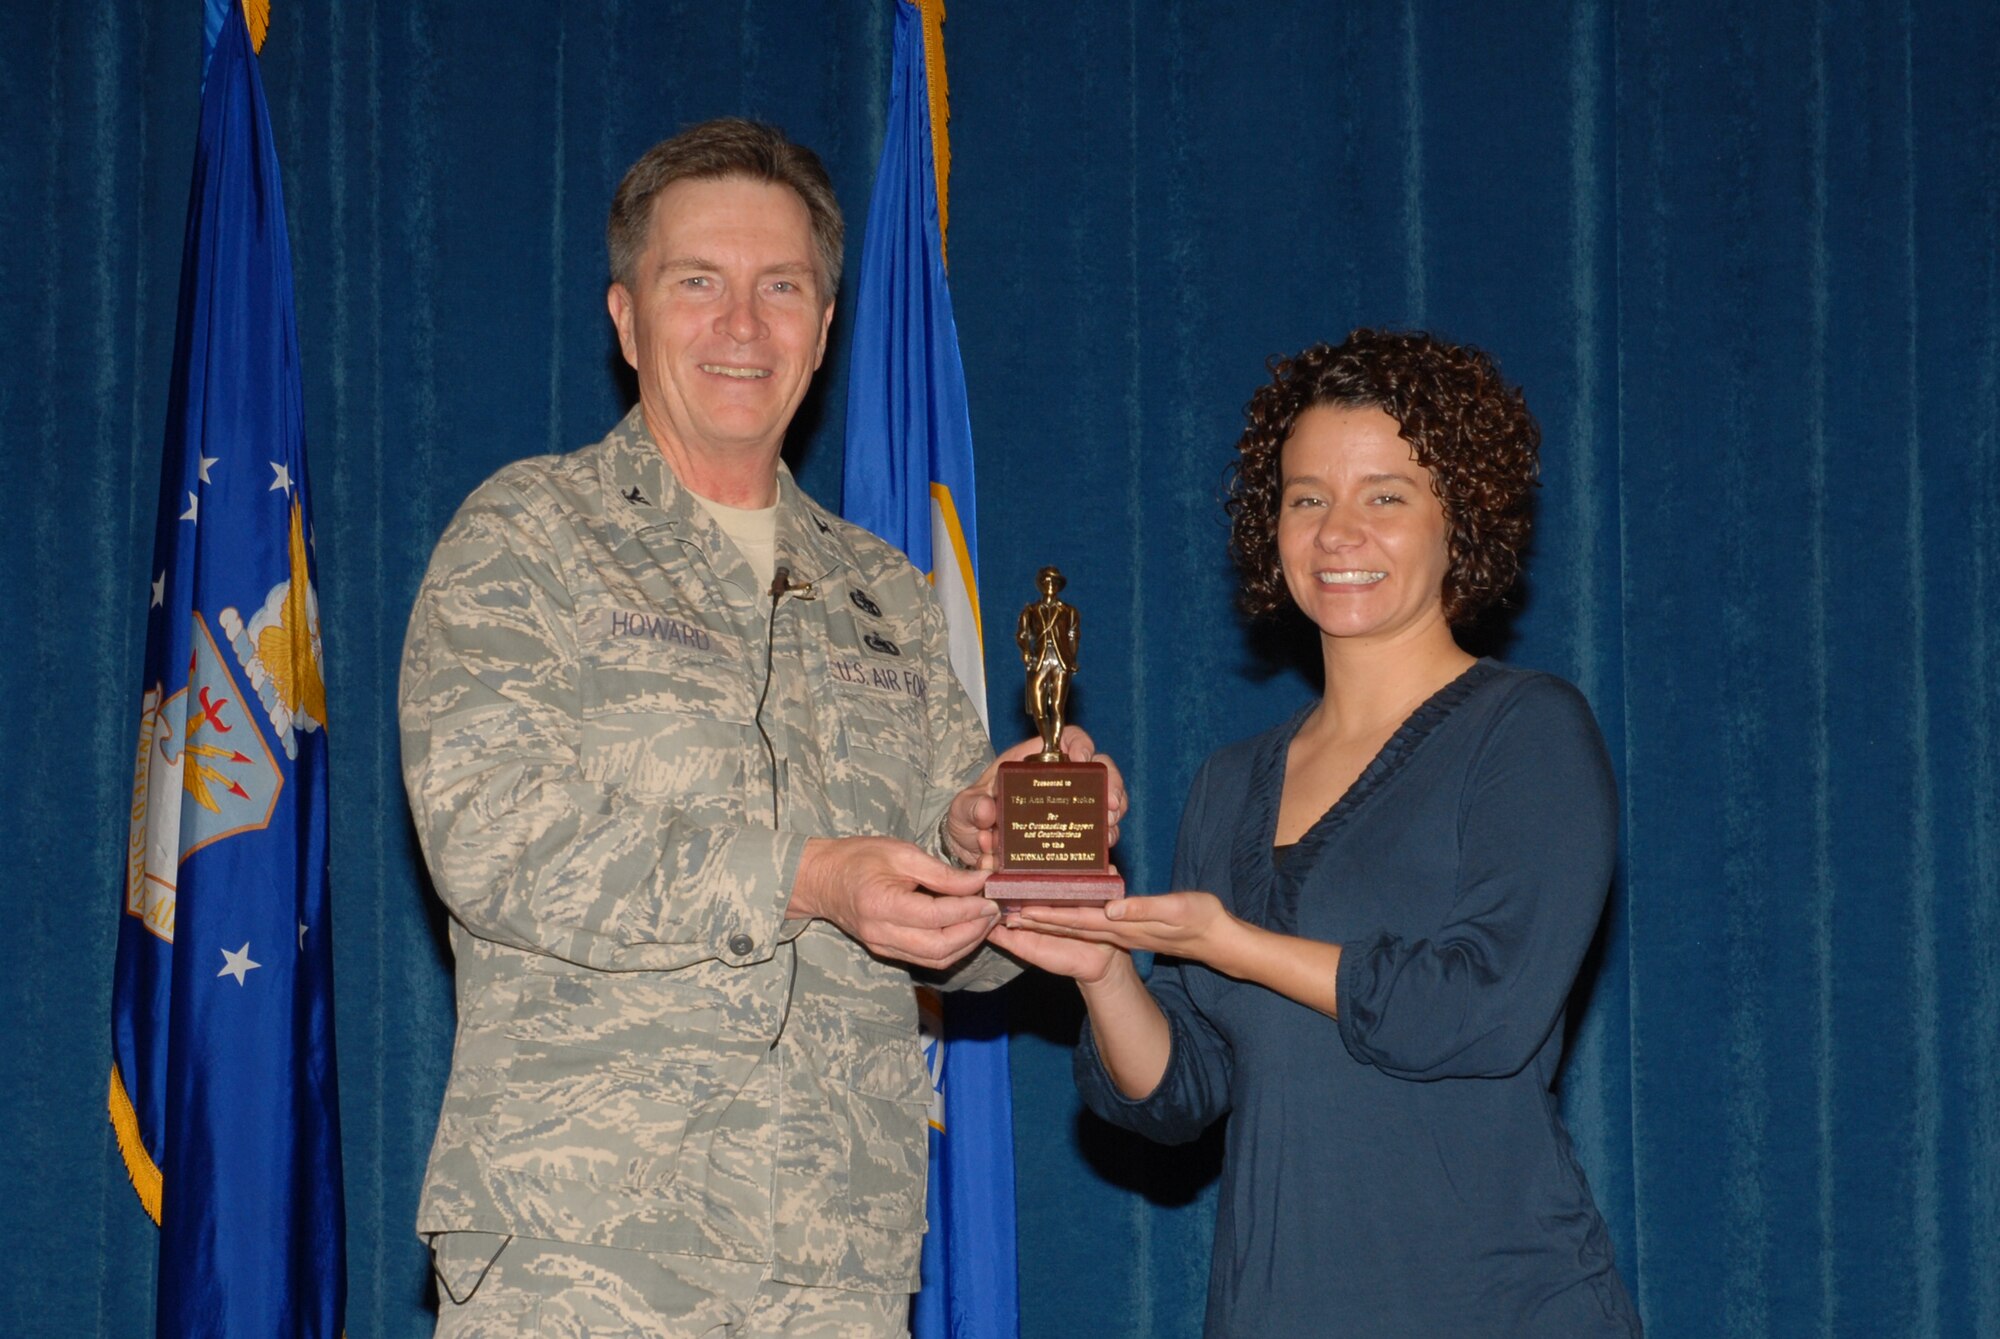 McGHEE TYSON AIR NATIONAL GUARD BASE, Tenn. -- Tech. Sgt. A. Ramey Stokes, right, an enlisted professional military education instructor, receives the National Guard Bureau minuteman award from Col. Richard B. Howard, commander, upon her departure from assignment at The I.G. Brown Air National Guard Training and Education Center here, Dec. 18, 2009.  (U.S. Air Force photograph by Master Sgt. Mavi Smith/Released)